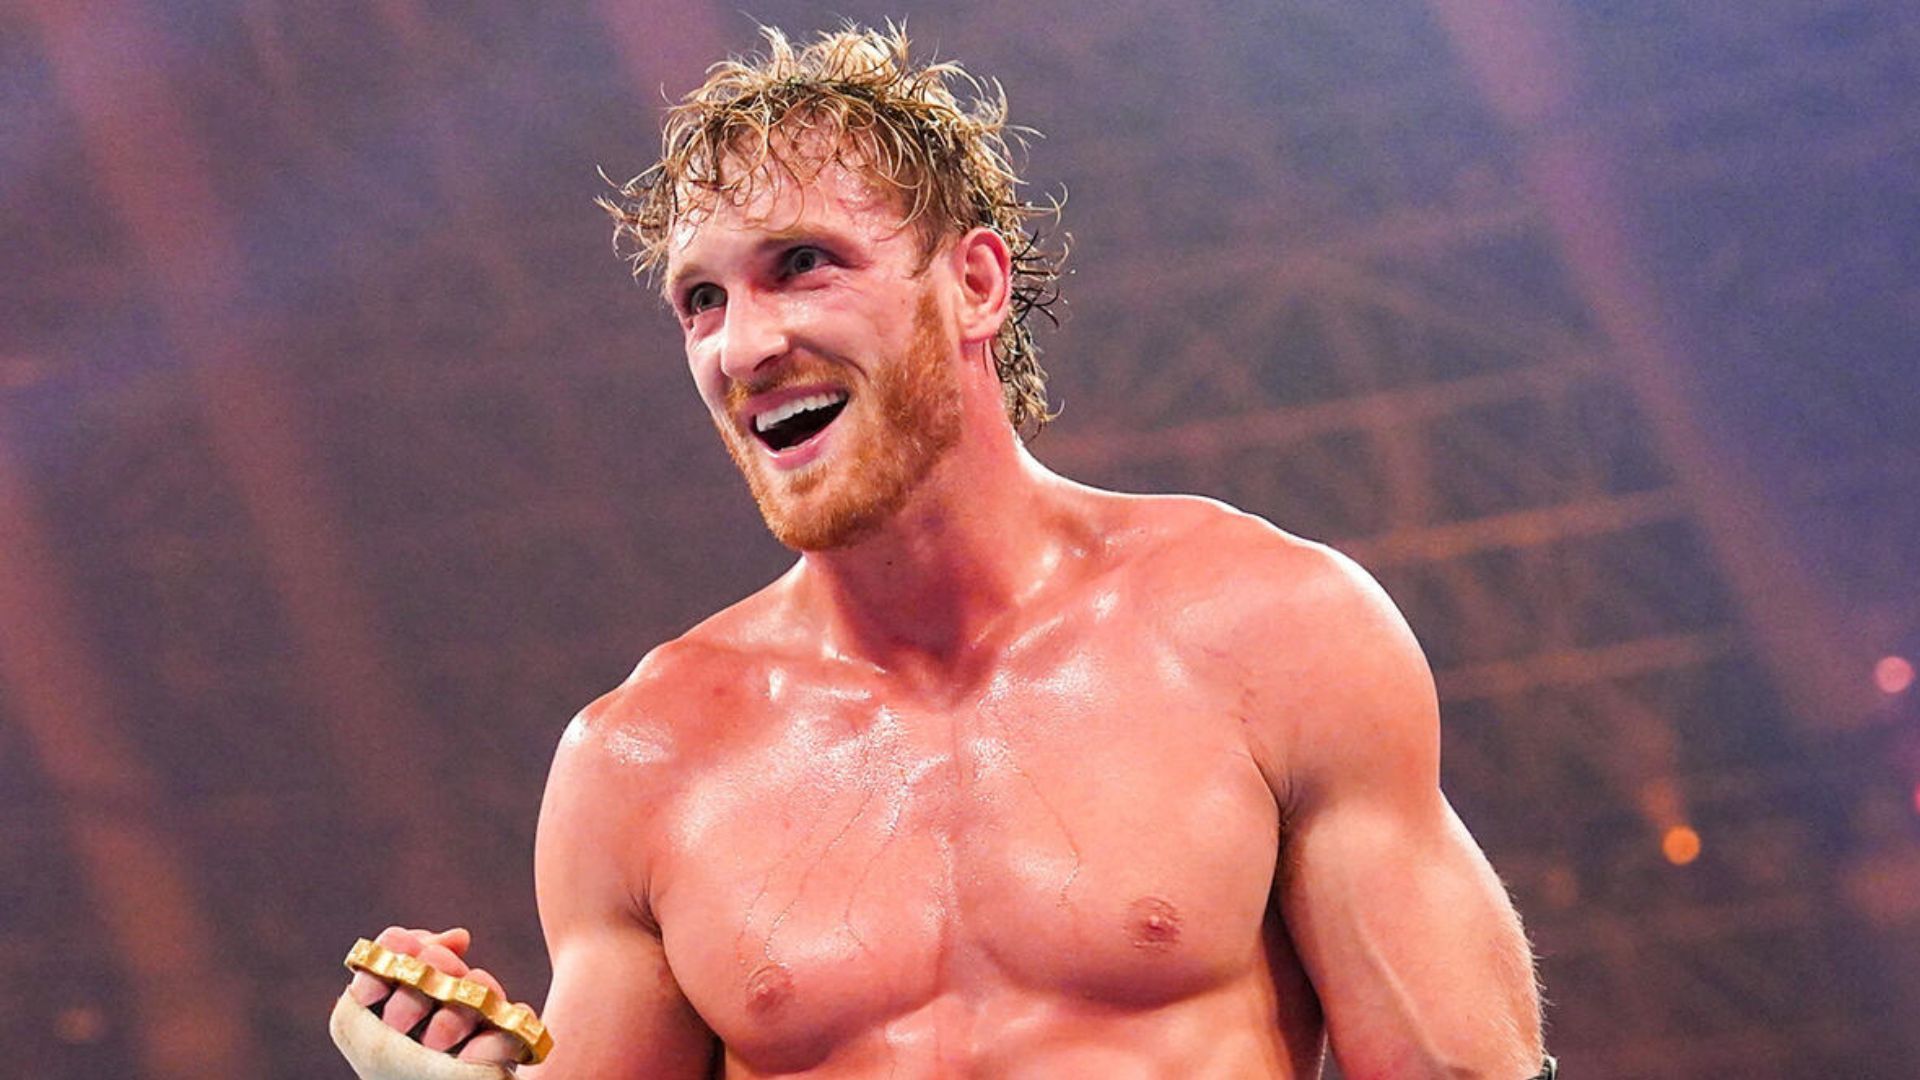 Logan Paul is the current United States Champion! [Image credit: WWE.com]